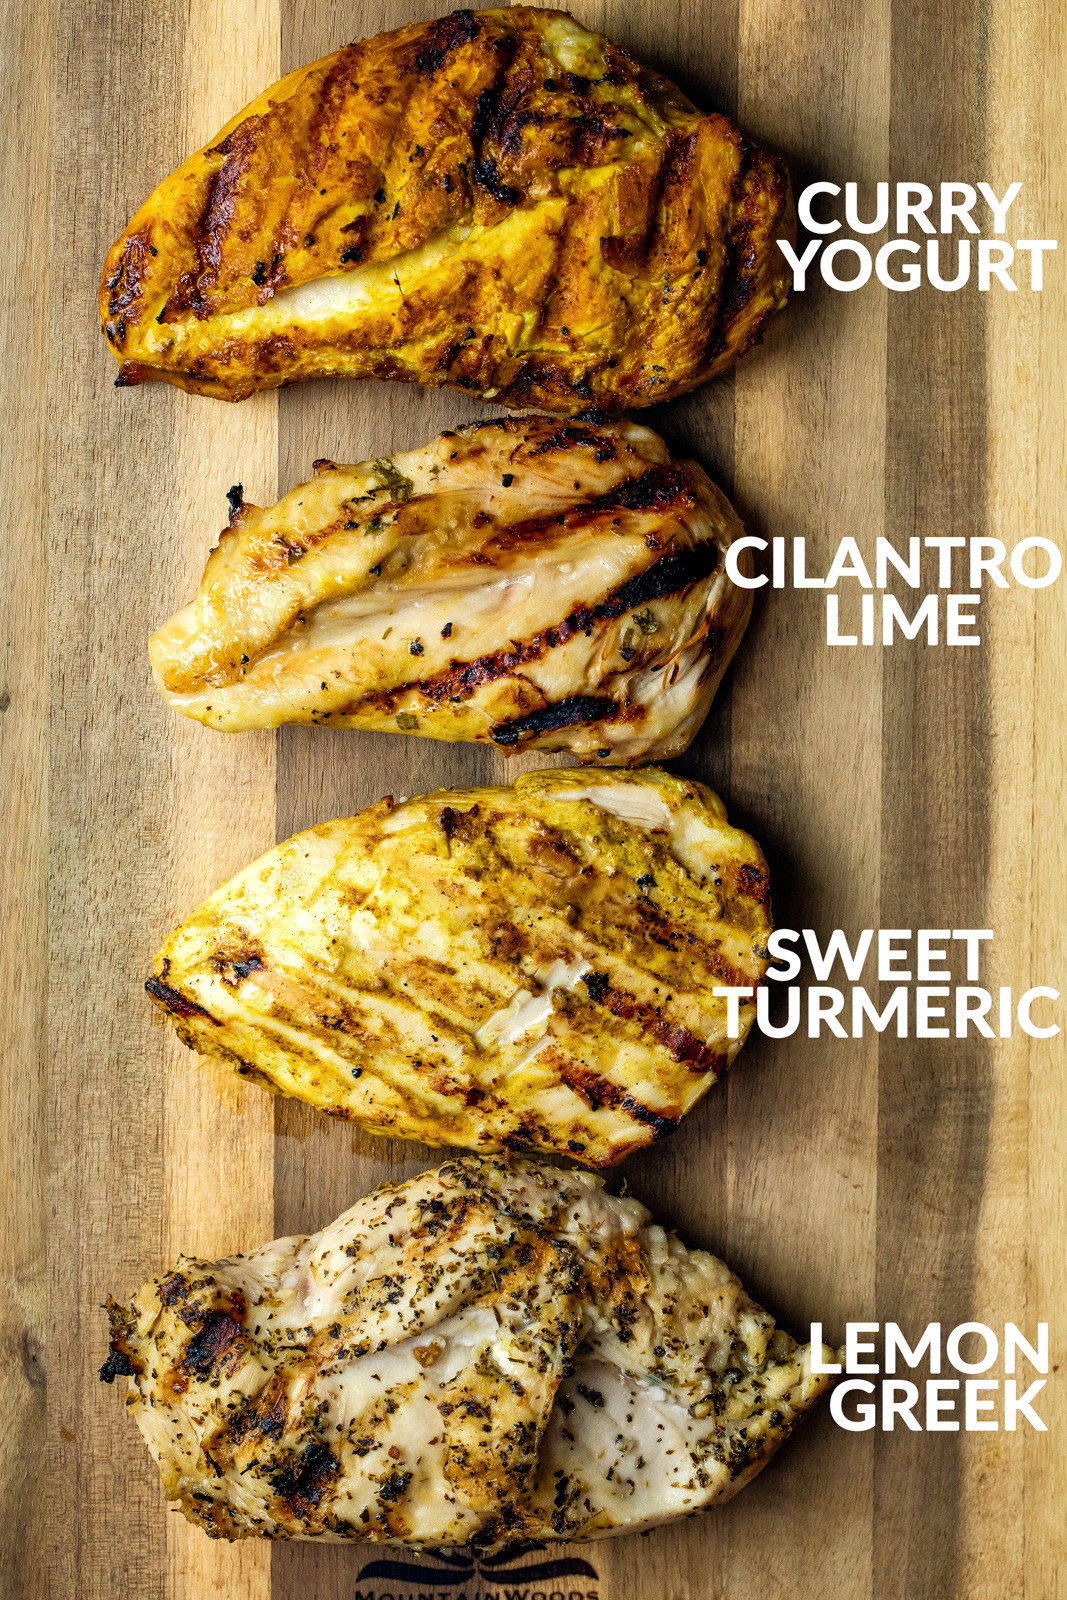 Healthy Marinades For Chicken
 4 Easy Chicken Marinades Living Lean & Clean with Just